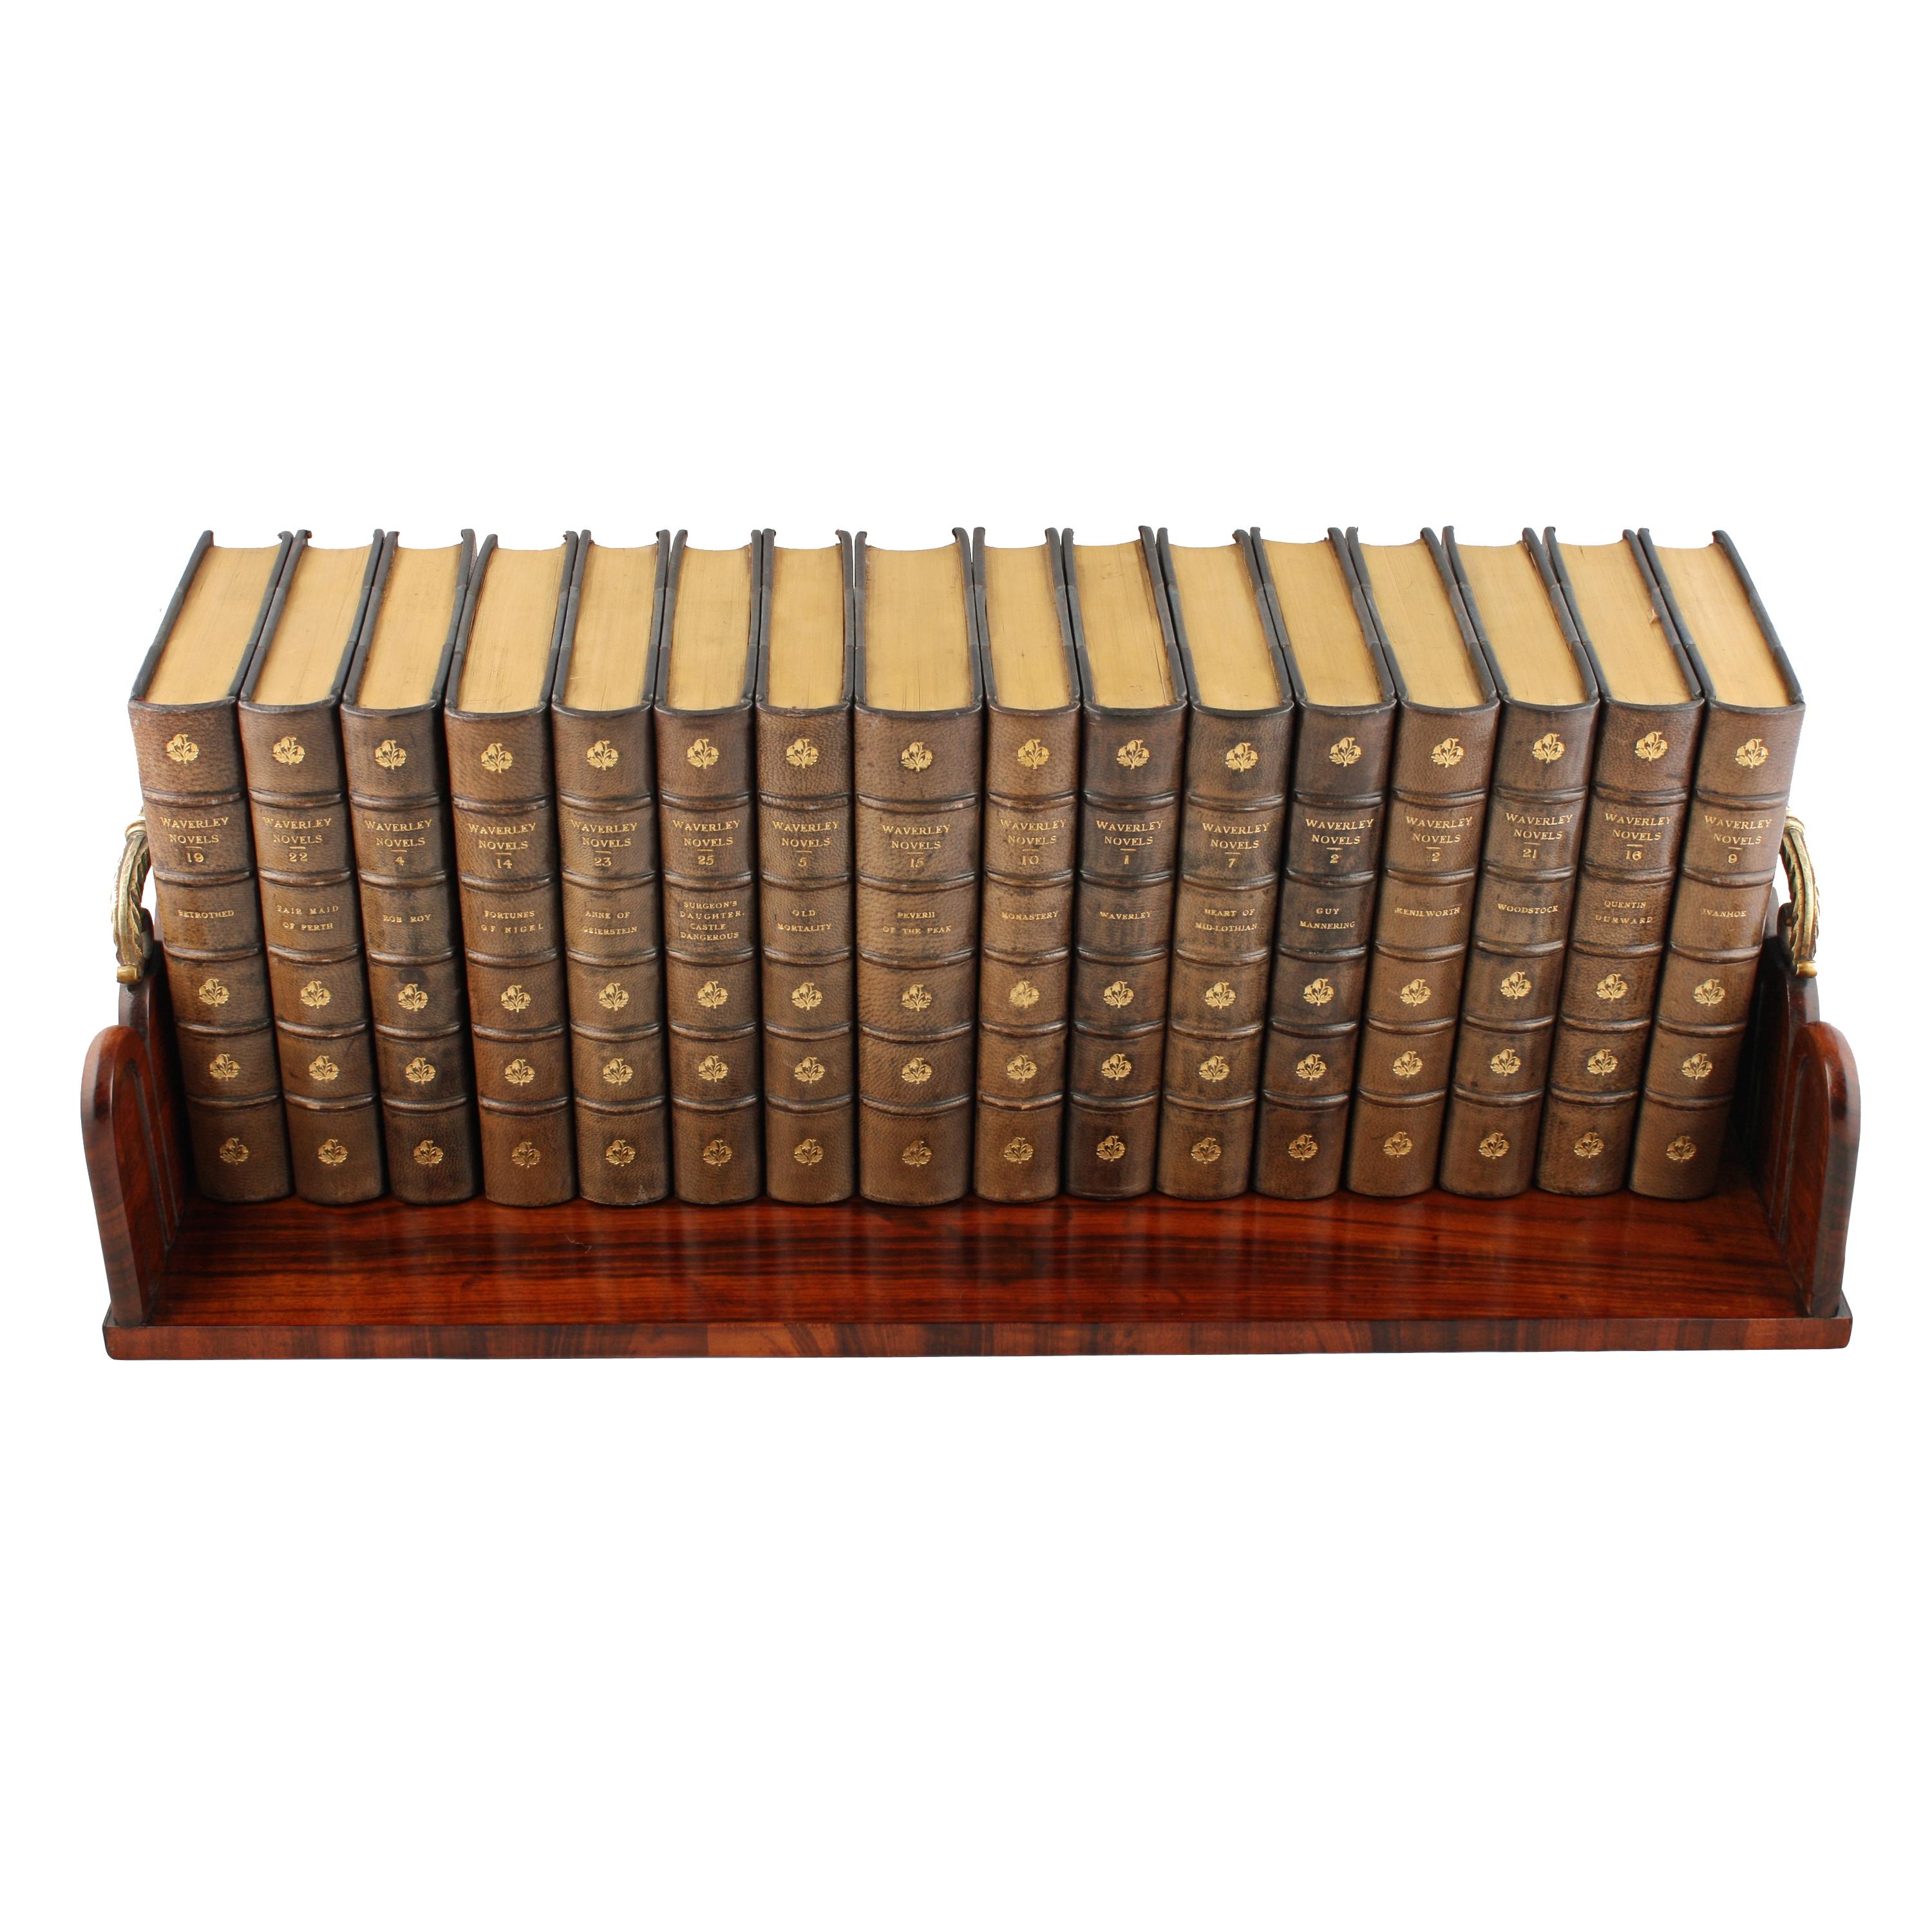 George IV zebra wood book stand

 
An early 19th century George IV zebra wood book stand.

The book stand has a shaped and carved gallery to three sides with gilt brass scrolling handles to the tops of the sides.

The stand is in good